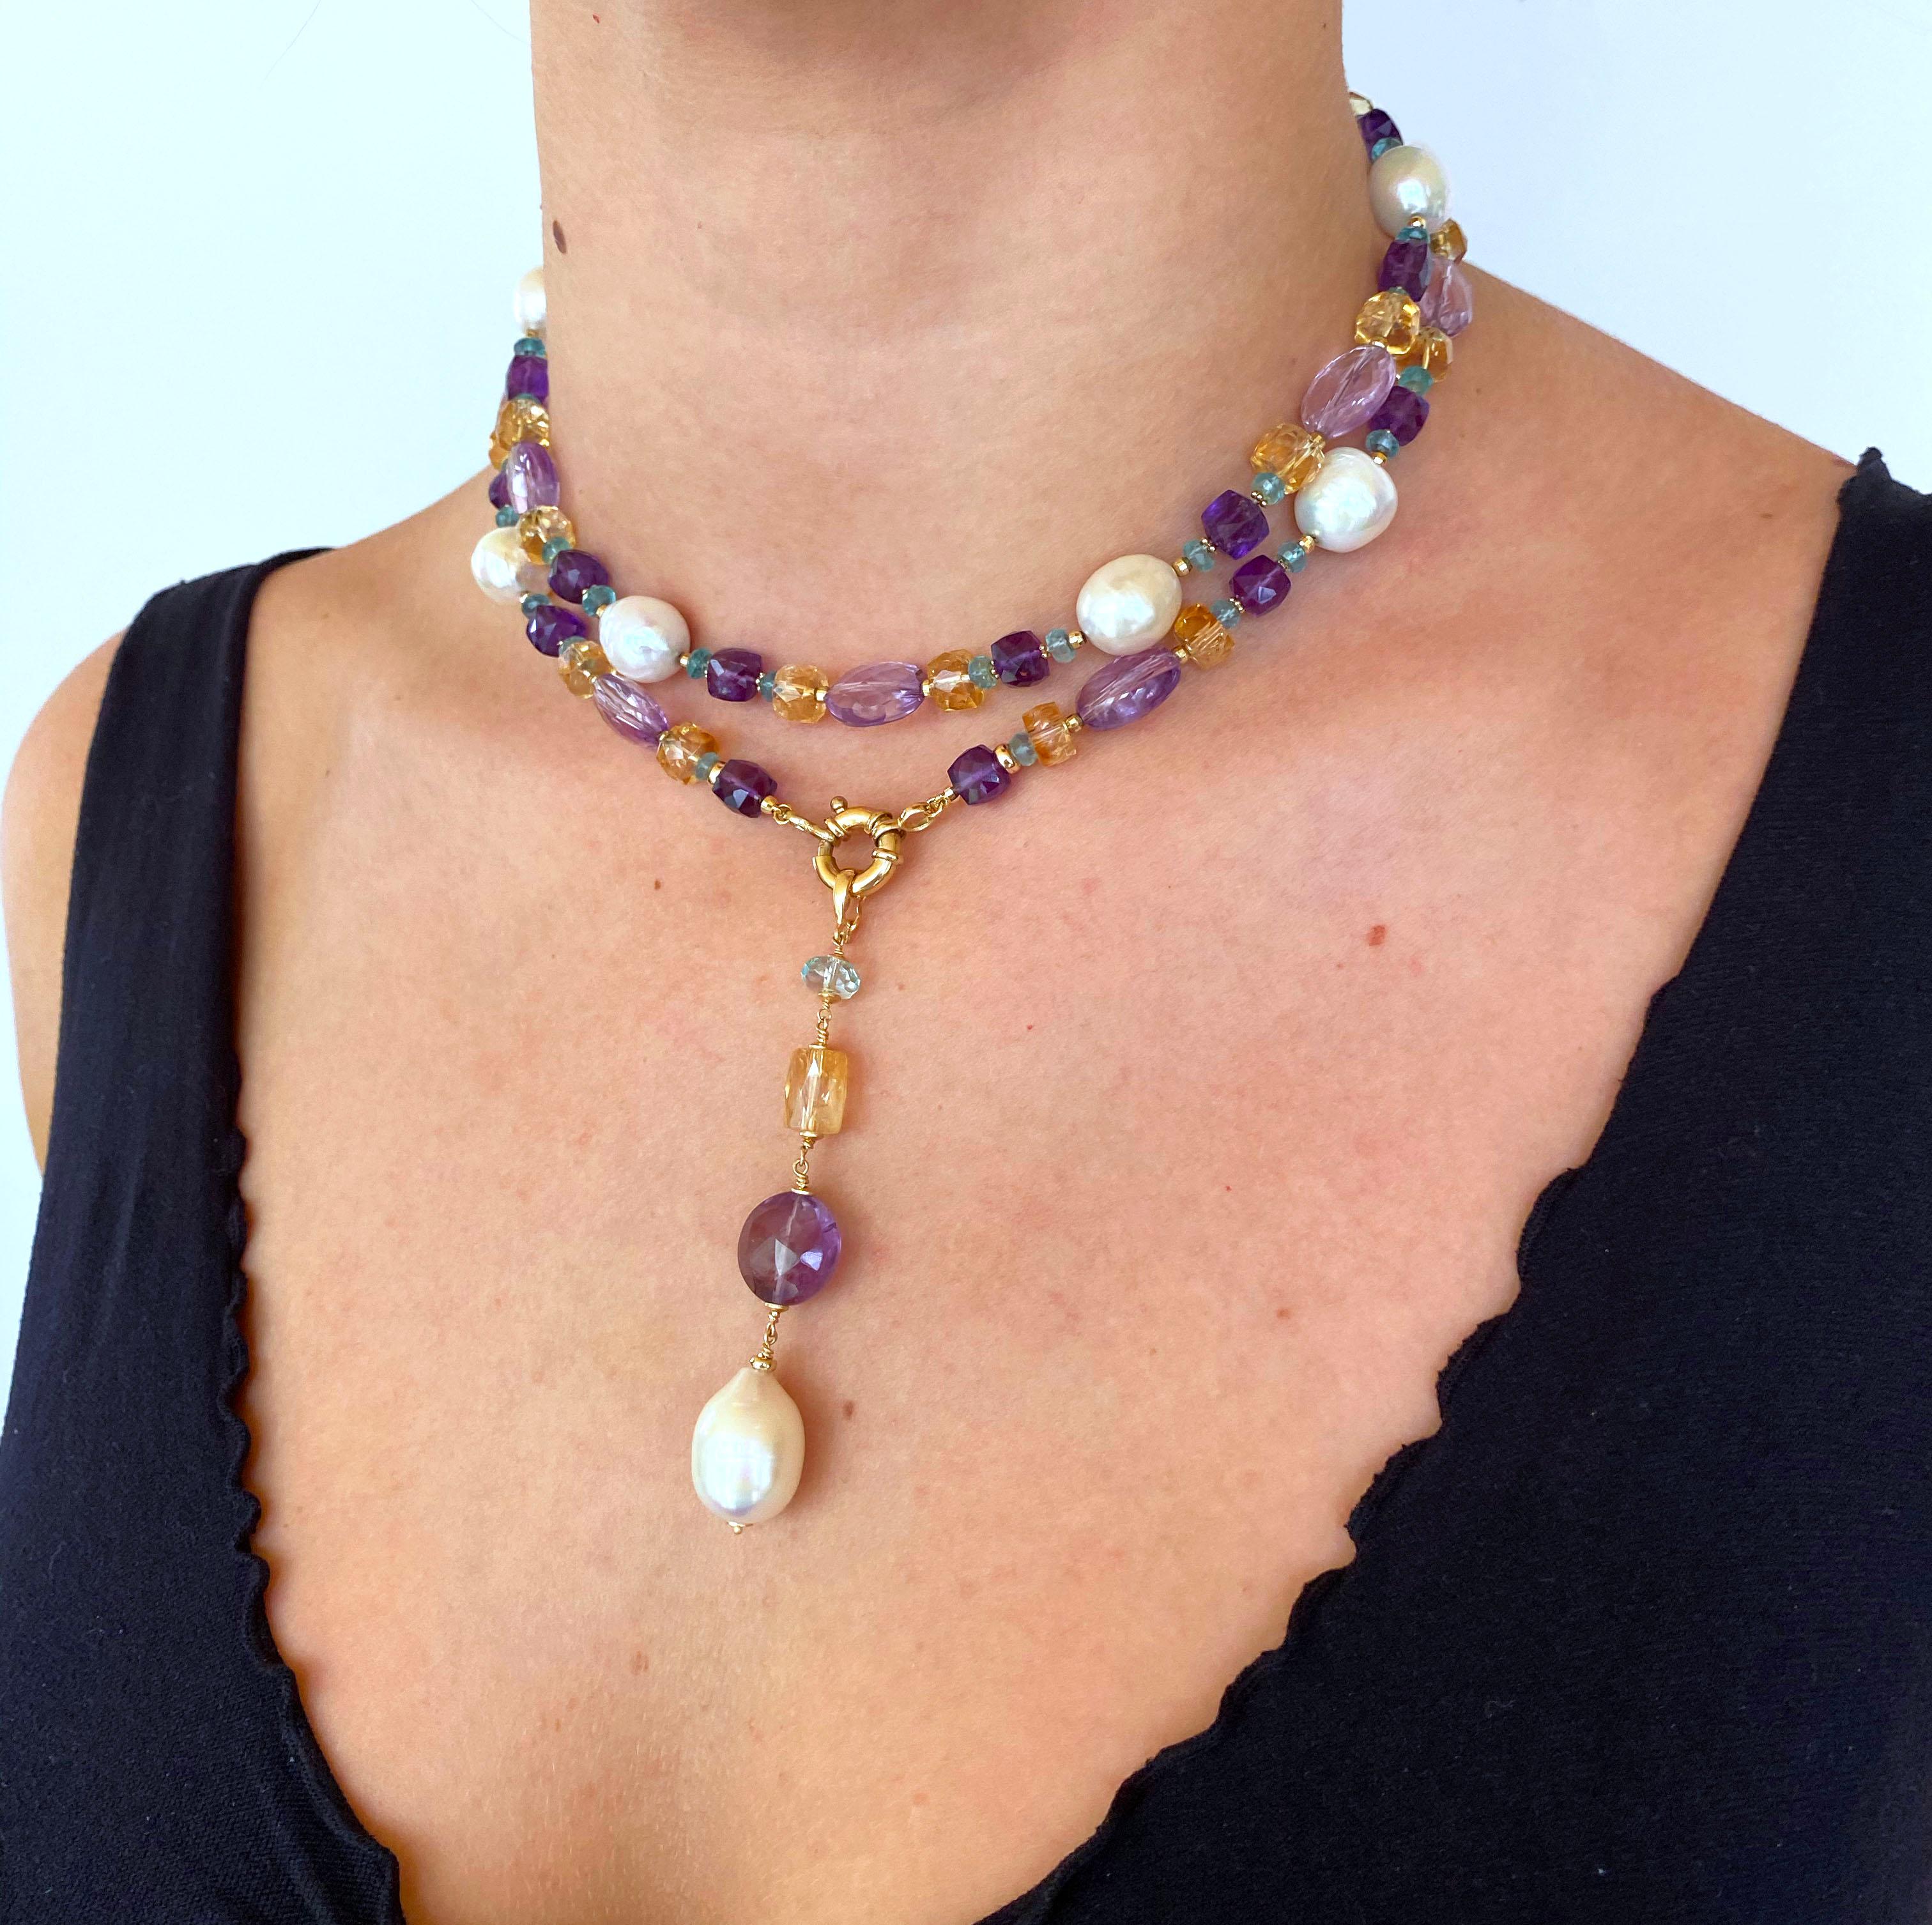 This gorgeous colorful and multi shaped, multi jewel Sautoir features different shaped high luster Pearls, Amethyst, Citrine and Aquamarine beautifully complimented by small multi shaped 14K Yellow Gold beads. This Sautoir meets at a 14K Yellow Gold